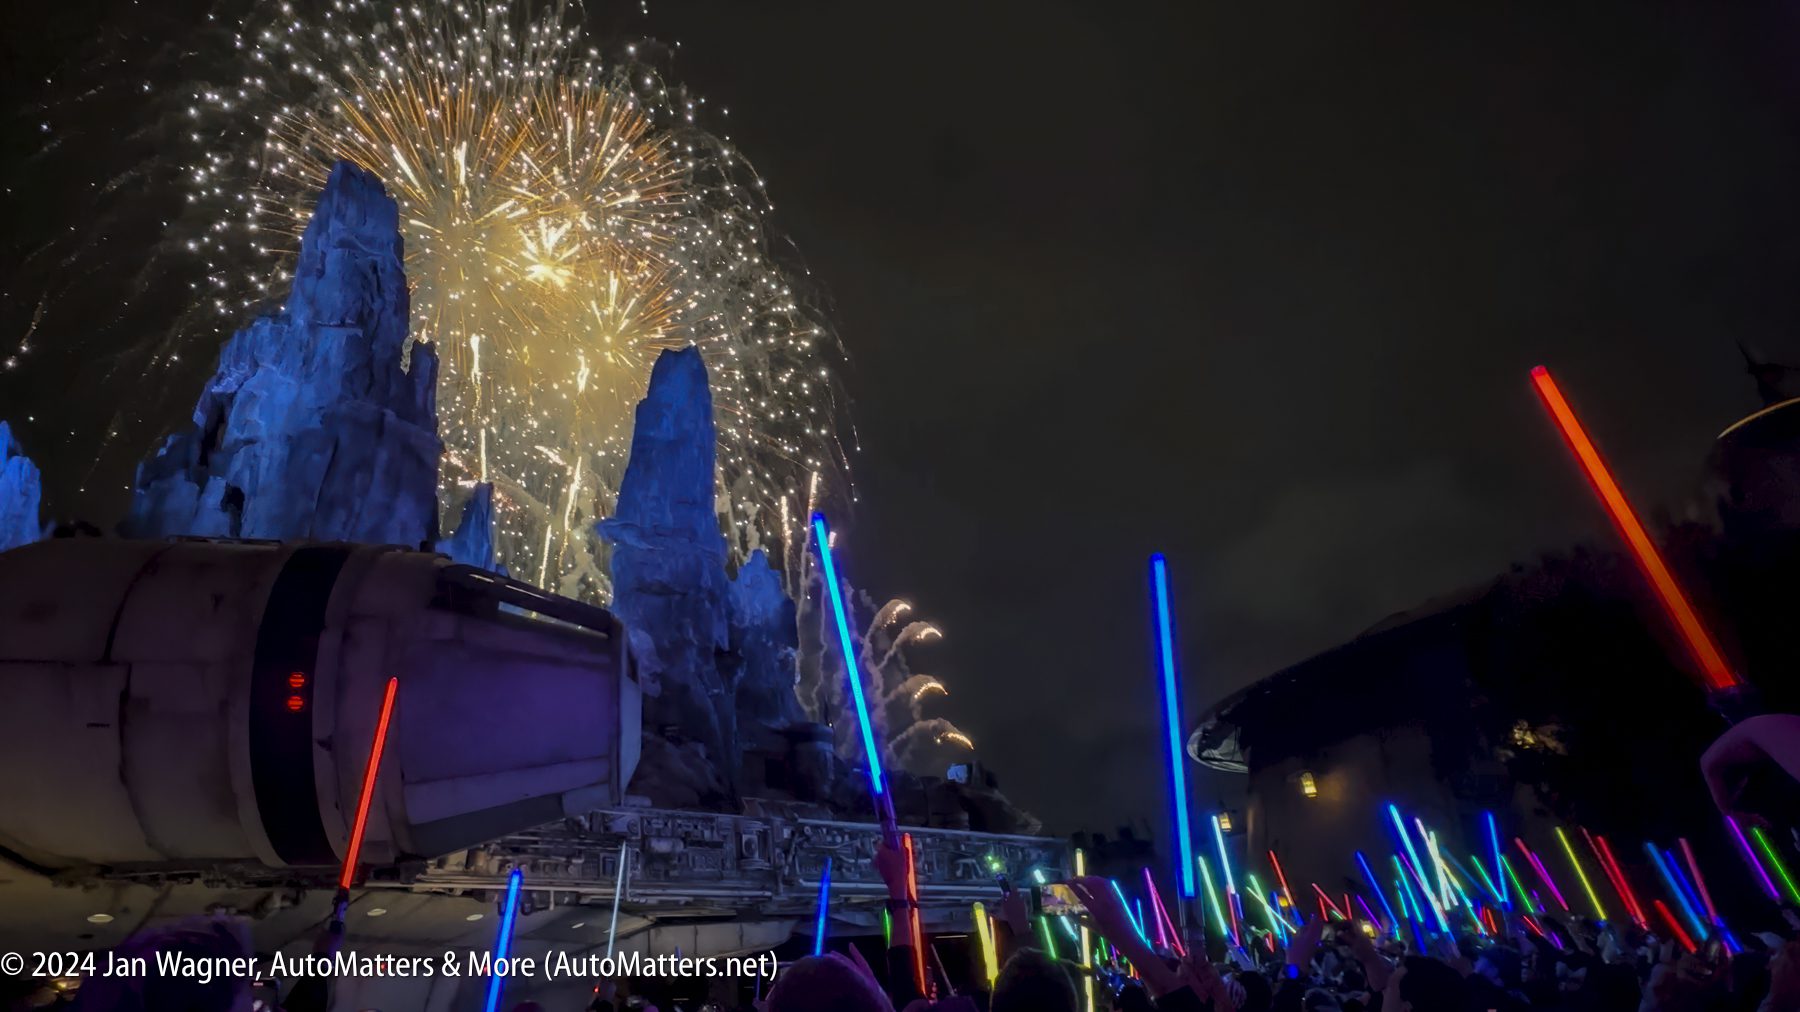 A crowd holding colored lightsabers looks up at a nighttime fireworks display set against rocky, futuristic structures.